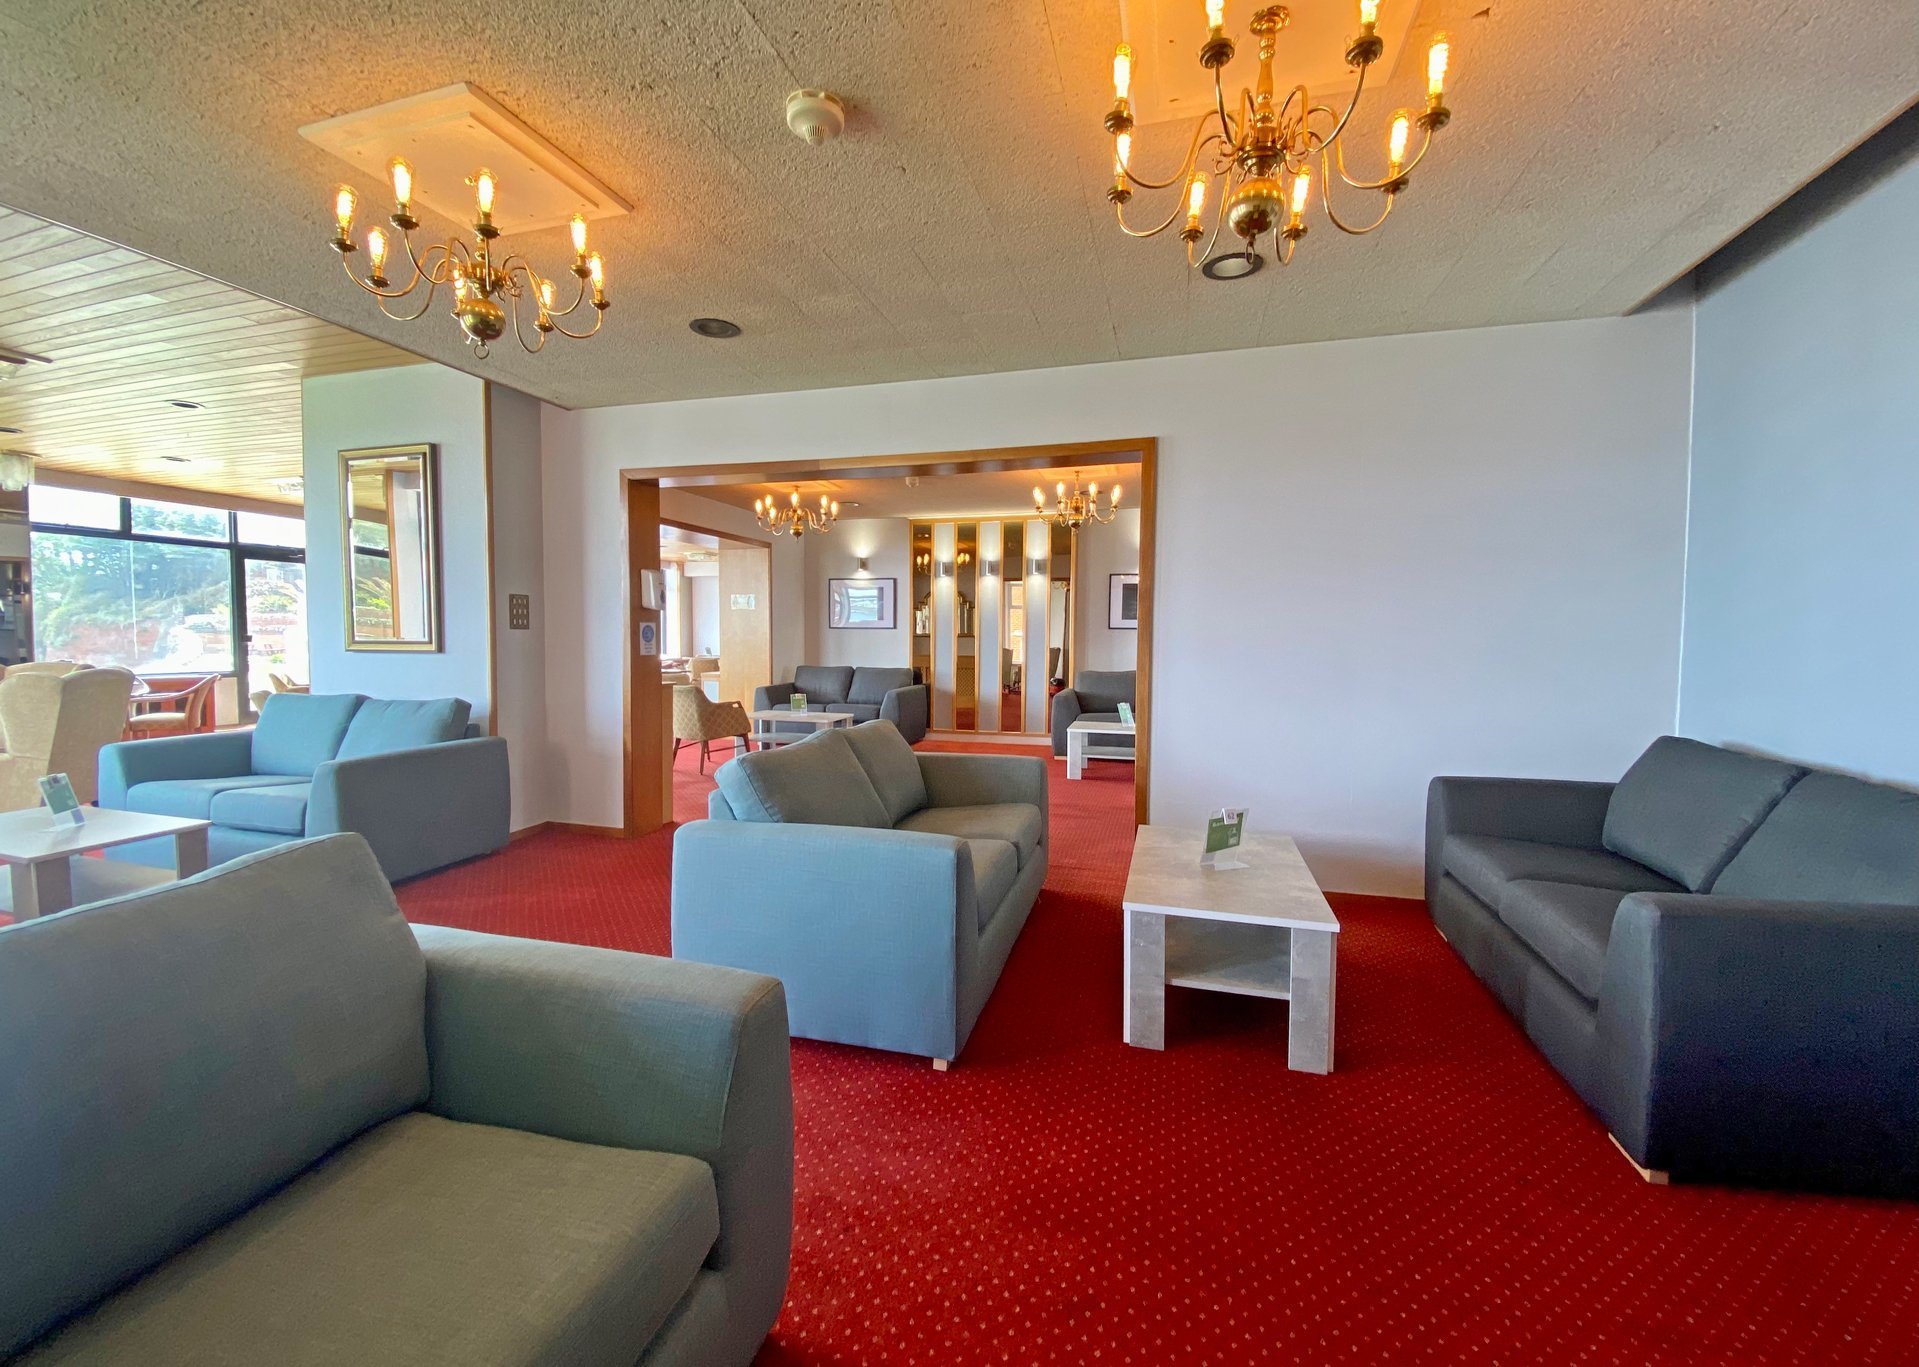 Lobby & Lounge at the Livermead Cliff Hotel